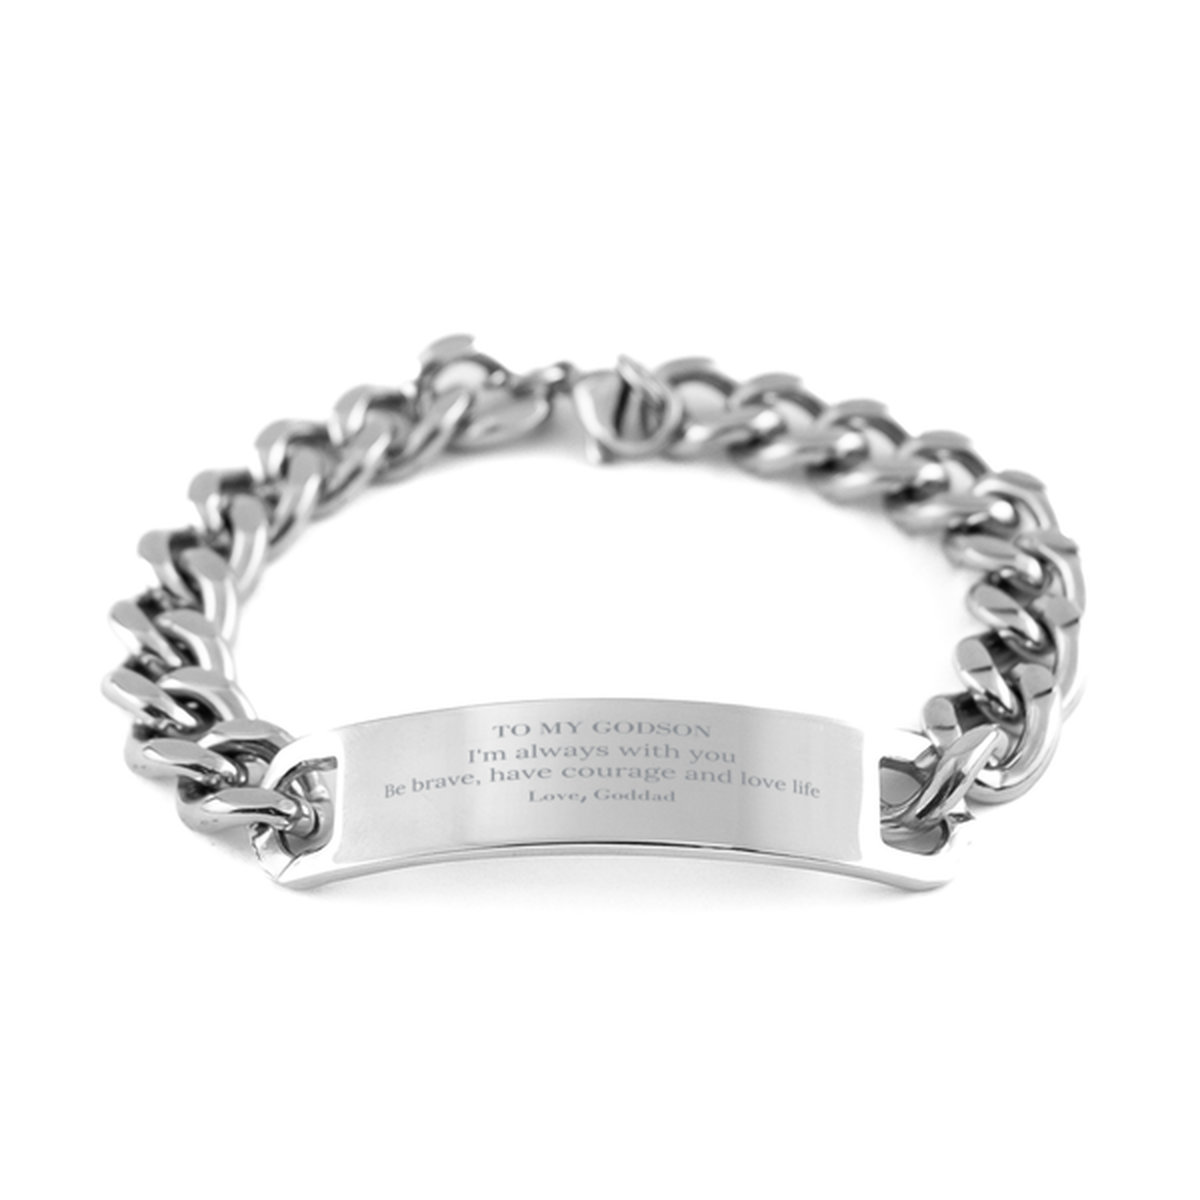 To My Godson Gifts from Goddad, Unique Cuban Chain Stainless Steel Bracelet Inspirational Christmas Birthday Graduation Gifts for Godson I'm always with you. Be brave, have courage and love life. Love, Goddad